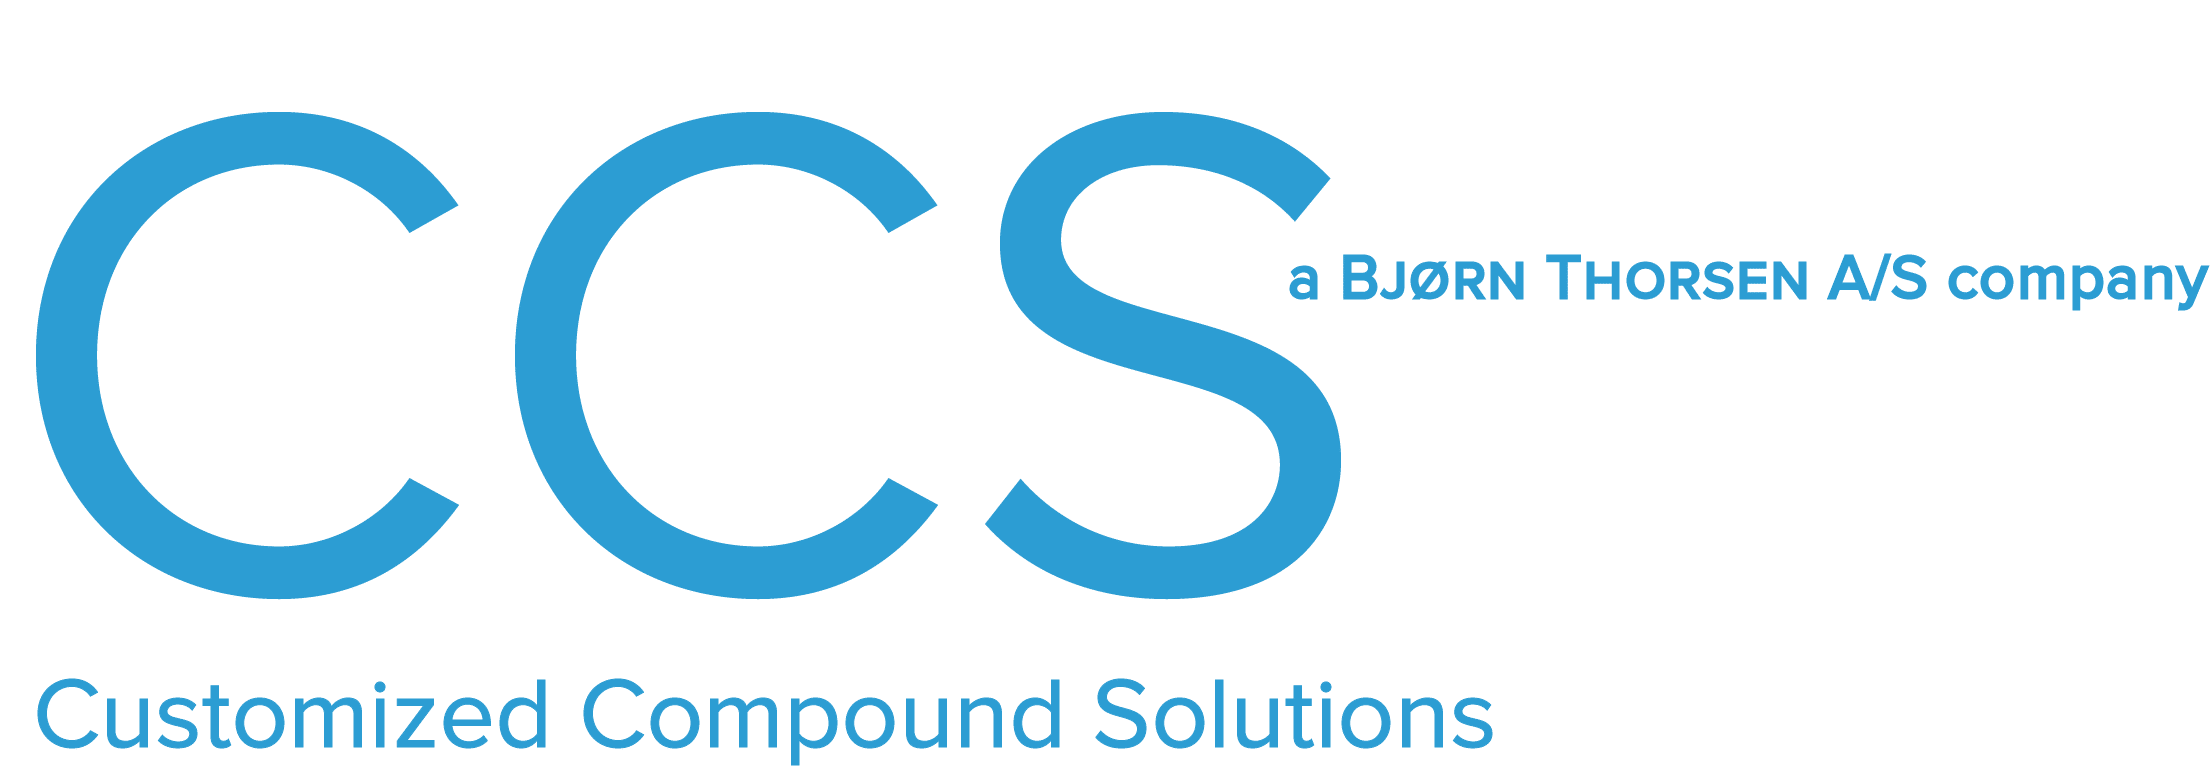 CCS provides sustainable, customized compounds or flexible polymer needs